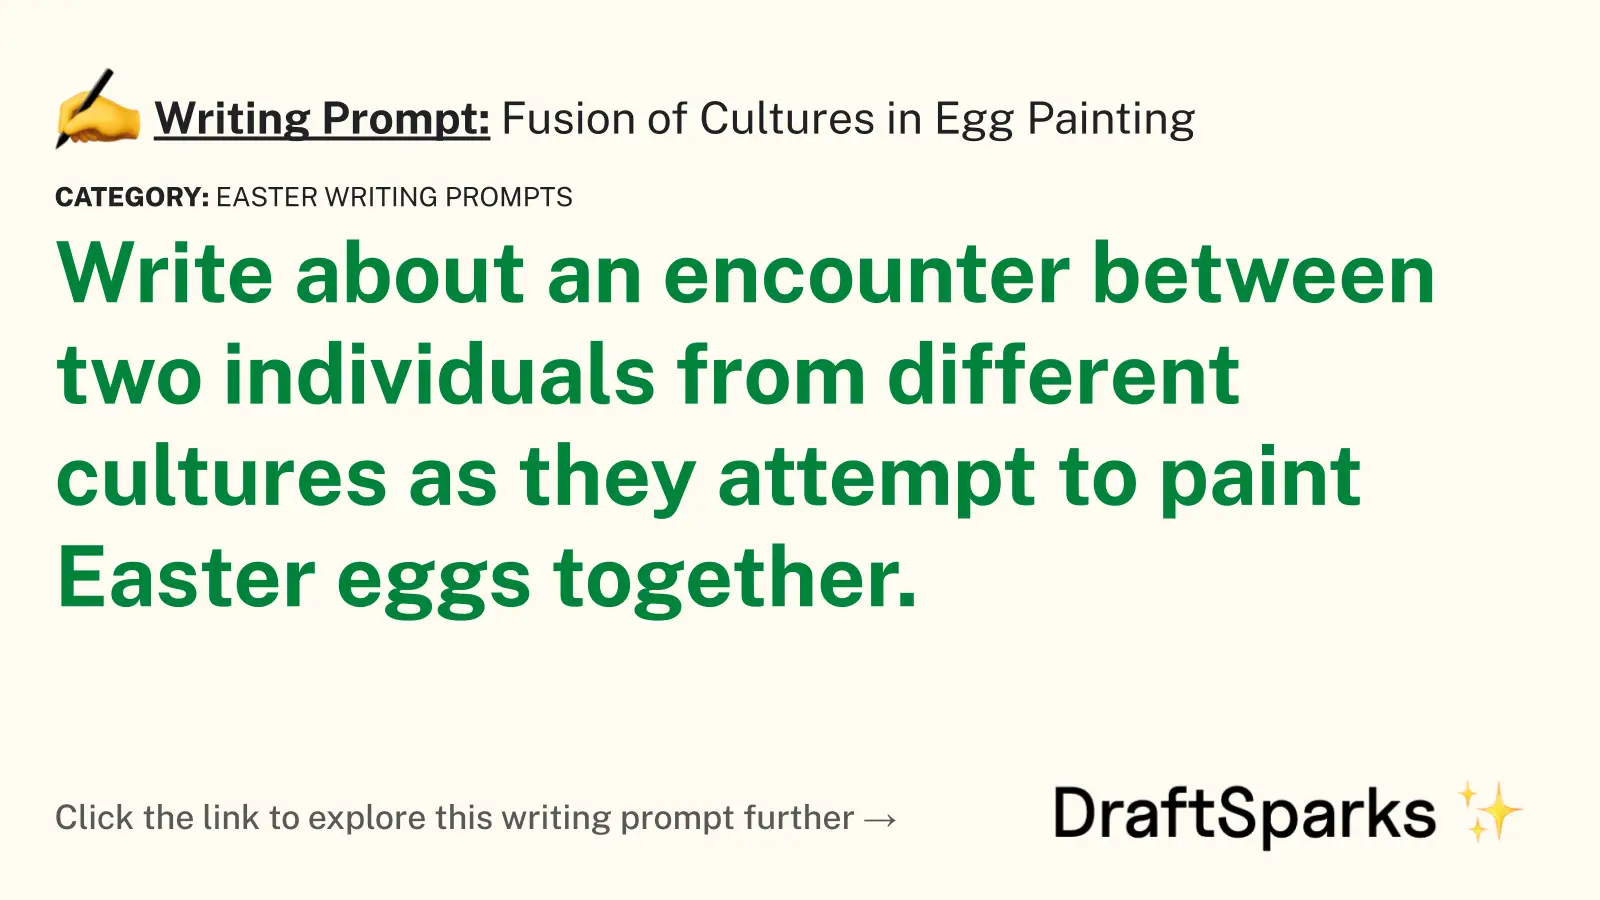 Fusion of Cultures in Egg Painting